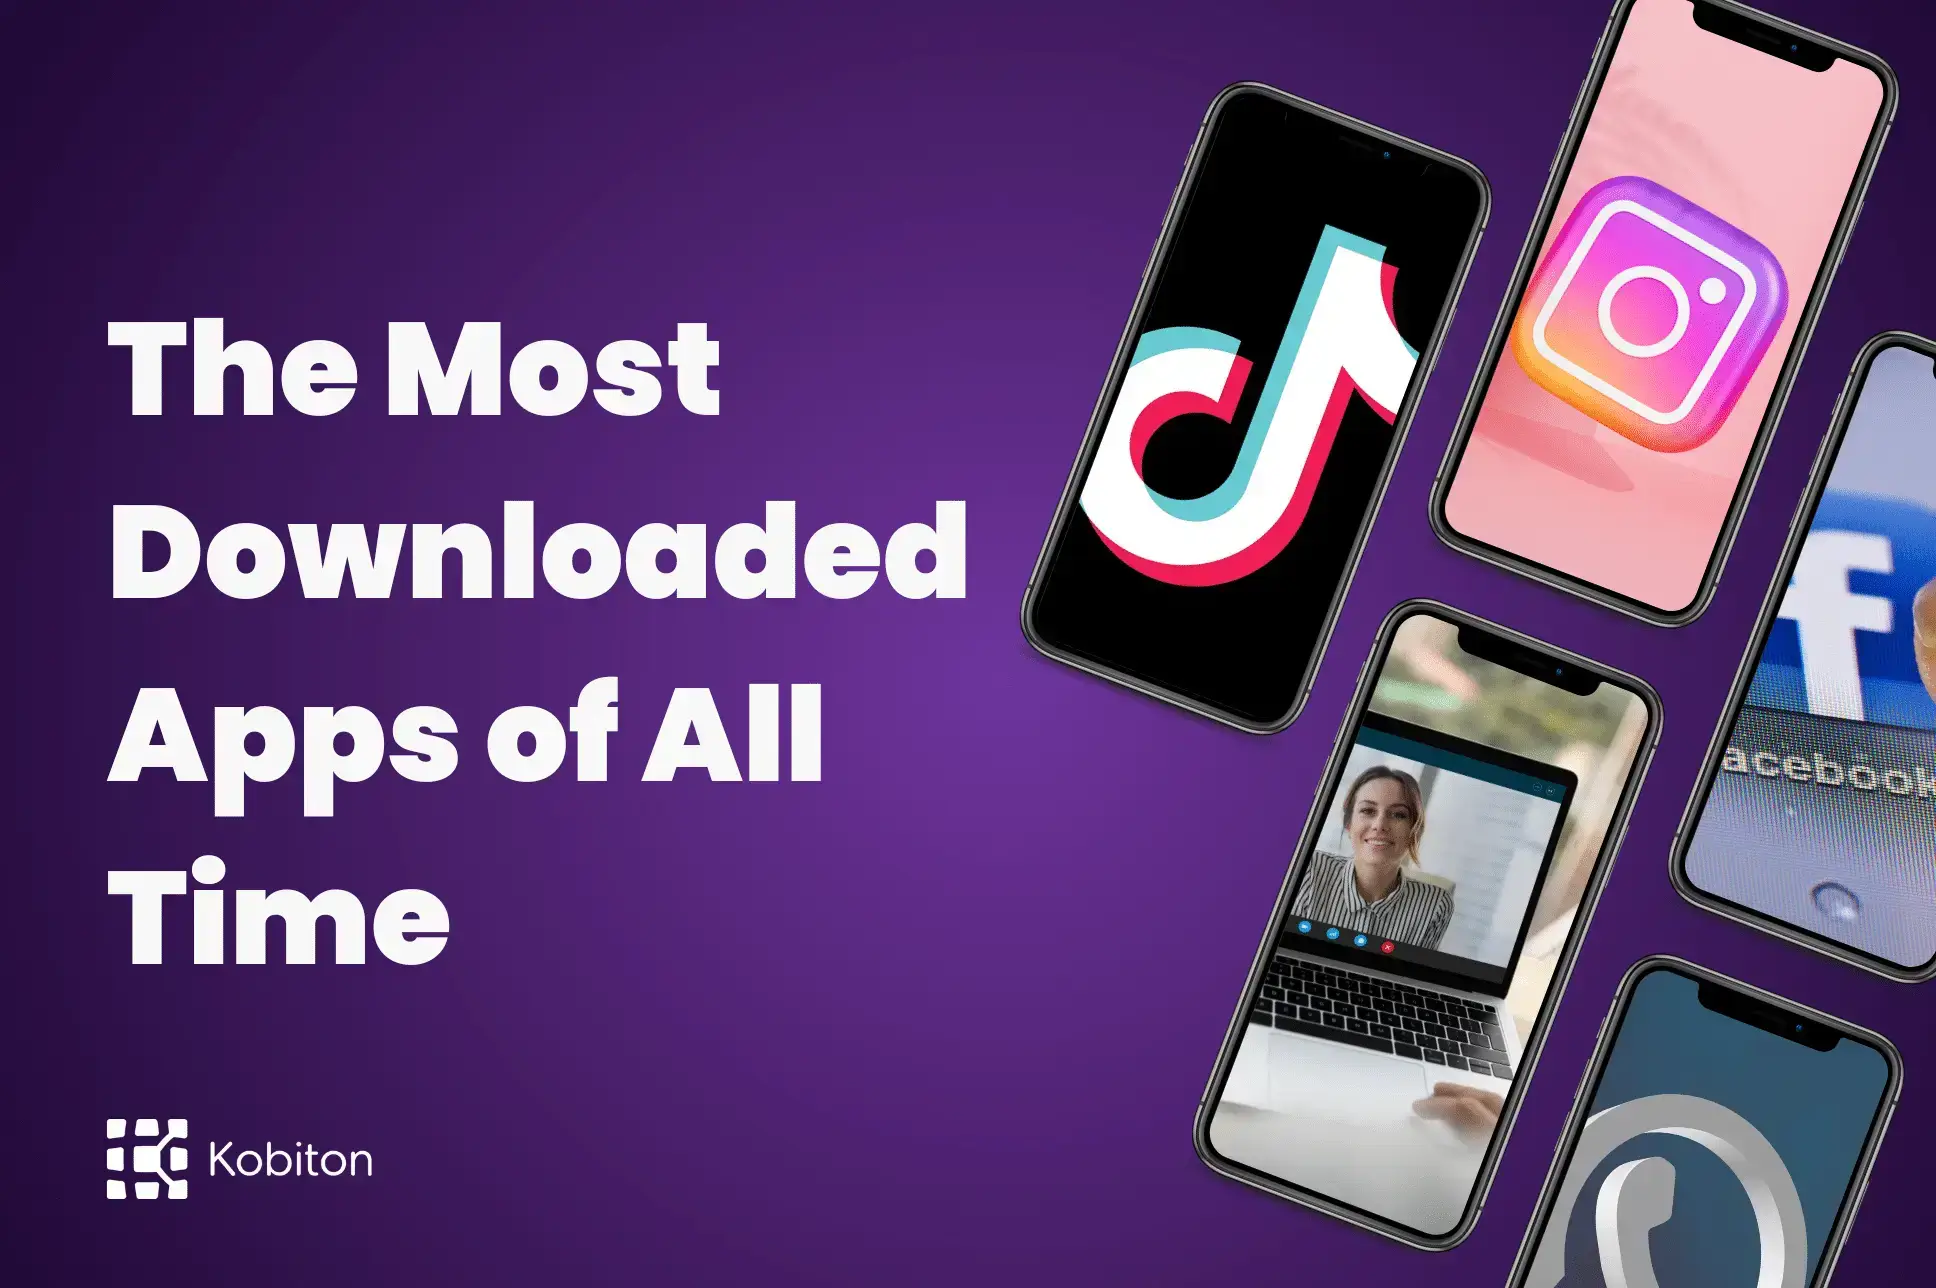 The Most Downloaded Apps of All Time